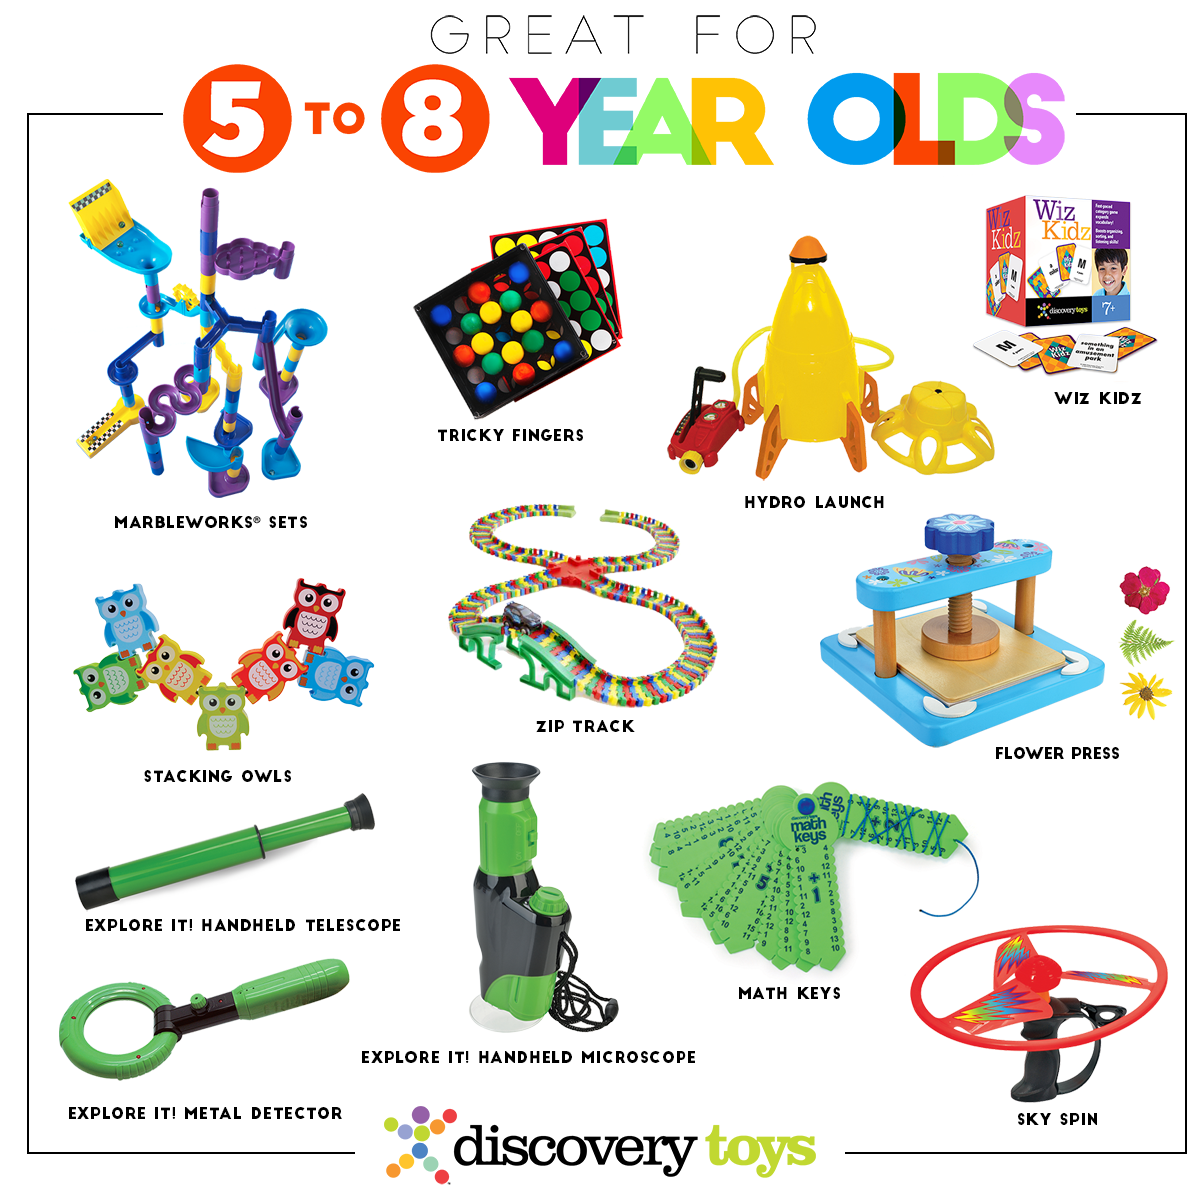 popular toys for 8 year olds 2018